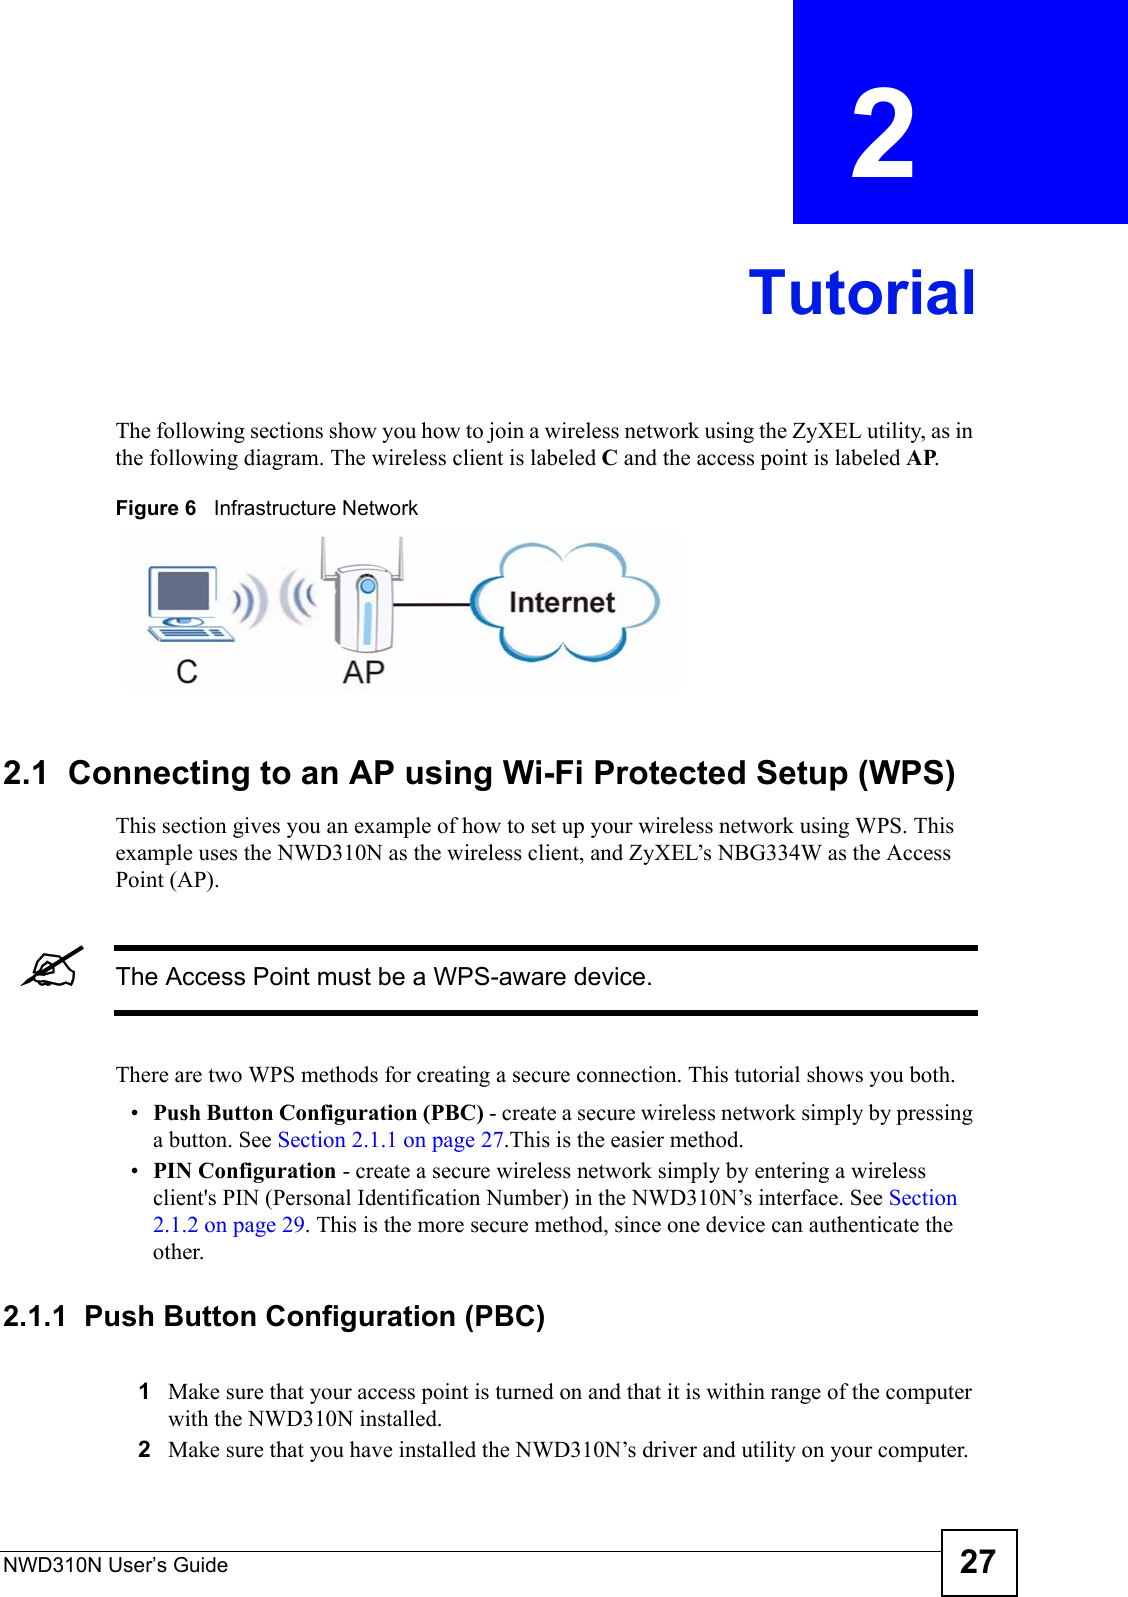 NWD310N User’s Guide 27CHAPTER  2 TutorialThe following sections show you how to join a wireless network using the ZyXEL utility, as in the following diagram. The wireless client is labeled C and the access point is labeled AP. Figure 6   Infrastructure Network2.1  Connecting to an AP using Wi-Fi Protected Setup (WPS)This section gives you an example of how to set up your wireless network using WPS. This example uses the NWD310N as the wireless client, and ZyXEL’s NBG334W as the Access Point (AP). &quot;The Access Point must be a WPS-aware device.There are two WPS methods for creating a secure connection. This tutorial shows you both.•Push Button Configuration (PBC) - create a secure wireless network simply by pressing a button. See Section 2.1.1 on page 27.This is the easier method.•PIN Configuration - create a secure wireless network simply by entering a wireless client&apos;s PIN (Personal Identification Number) in the NWD310N’s interface. See Section 2.1.2 on page 29. This is the more secure method, since one device can authenticate the other.2.1.1  Push Button Configuration (PBC)1Make sure that your access point is turned on and that it is within range of the computer with the NWD310N installed. 2Make sure that you have installed the NWD310N’s driver and utility on your computer.